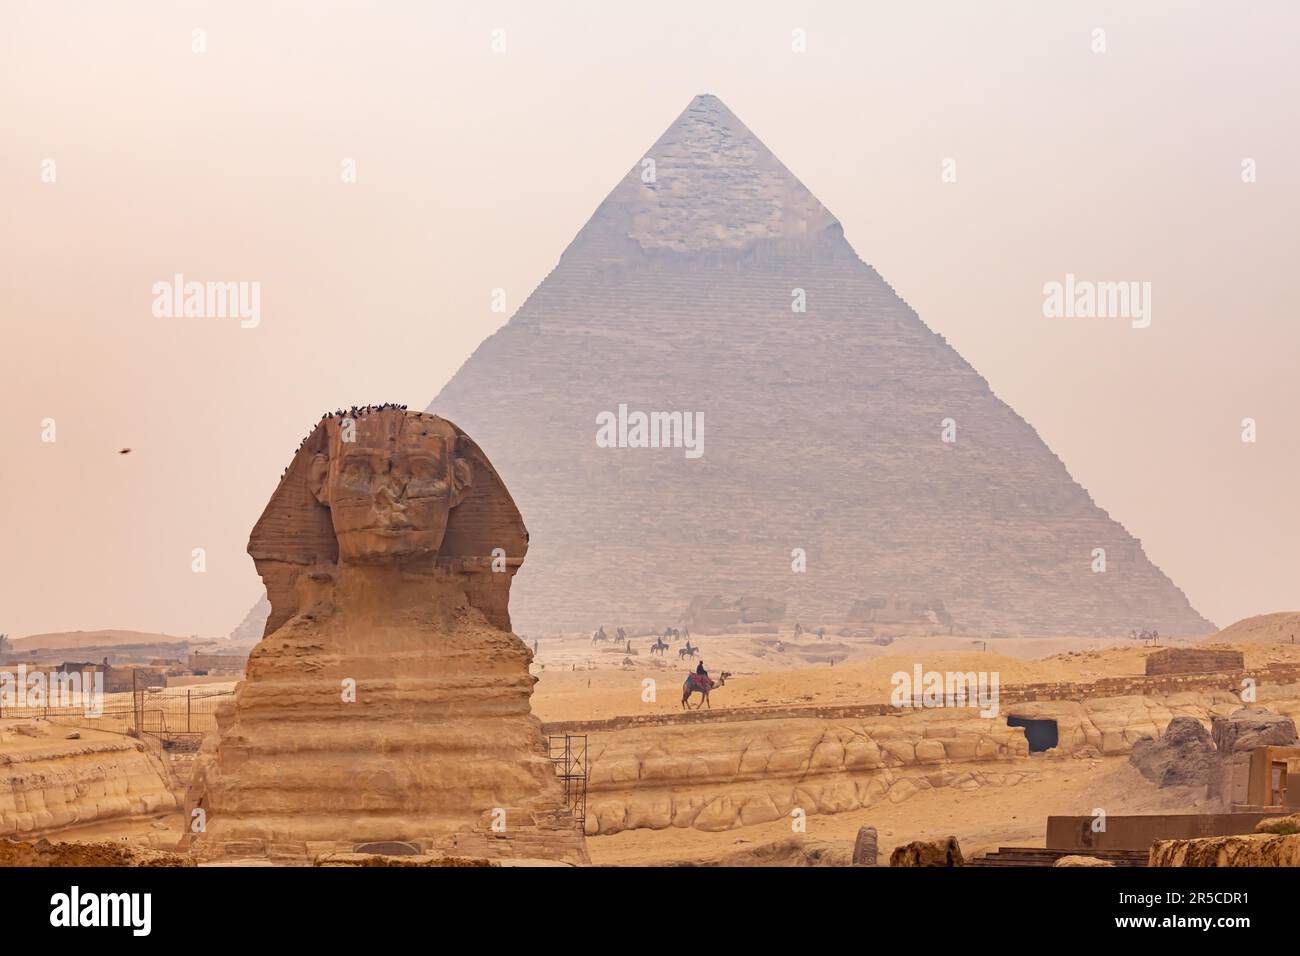 View of Sphinx in The Giza Plateau with The Great Pyramid of Giza or The Pyramid of Khufu in the background in hazy day, Cairo, Egypt Stock Photo